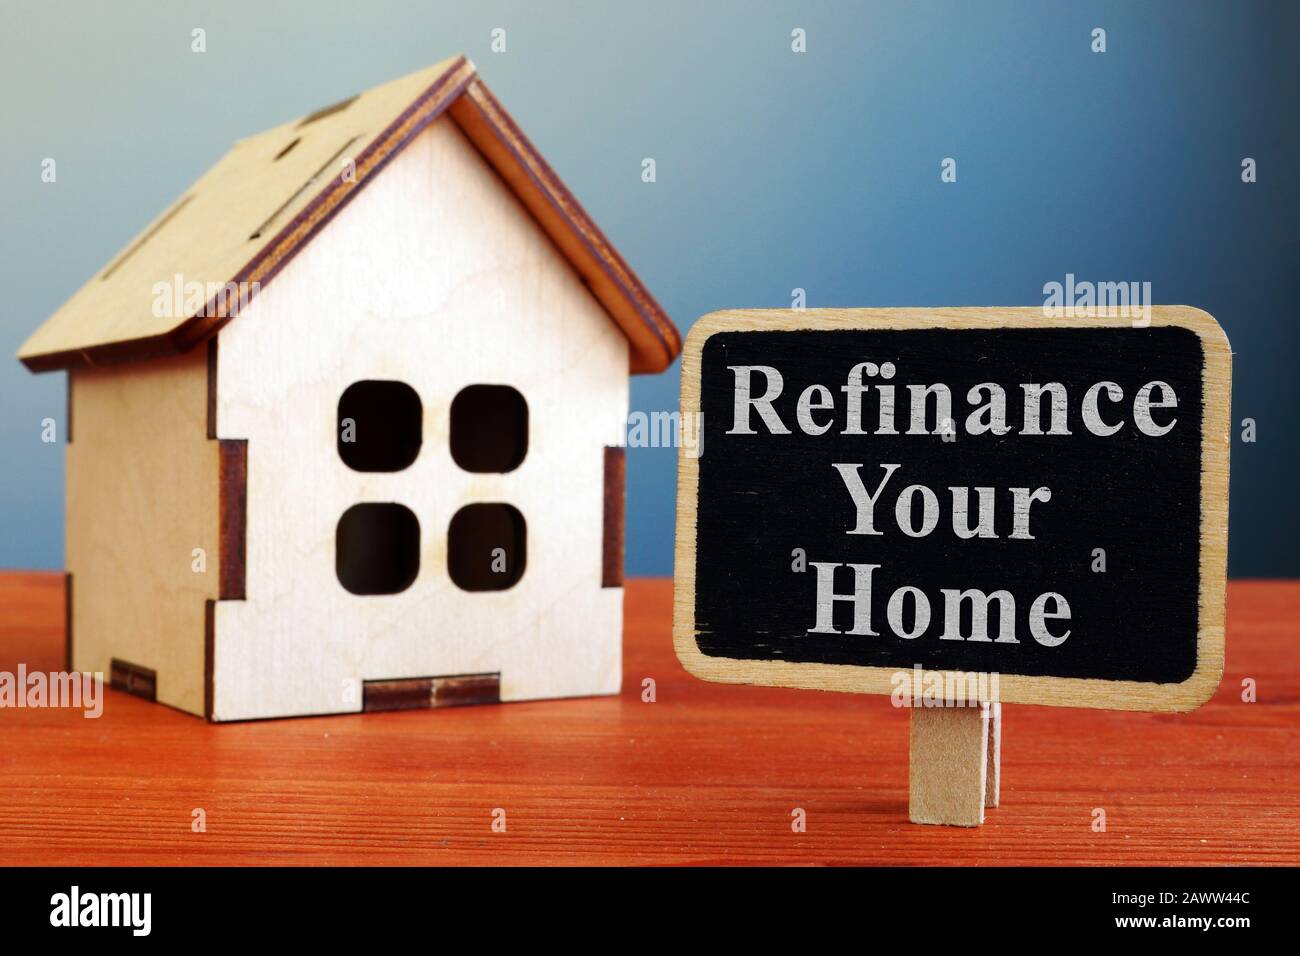 Refinance Your Home mortgage board and wooden house. Stock Photo